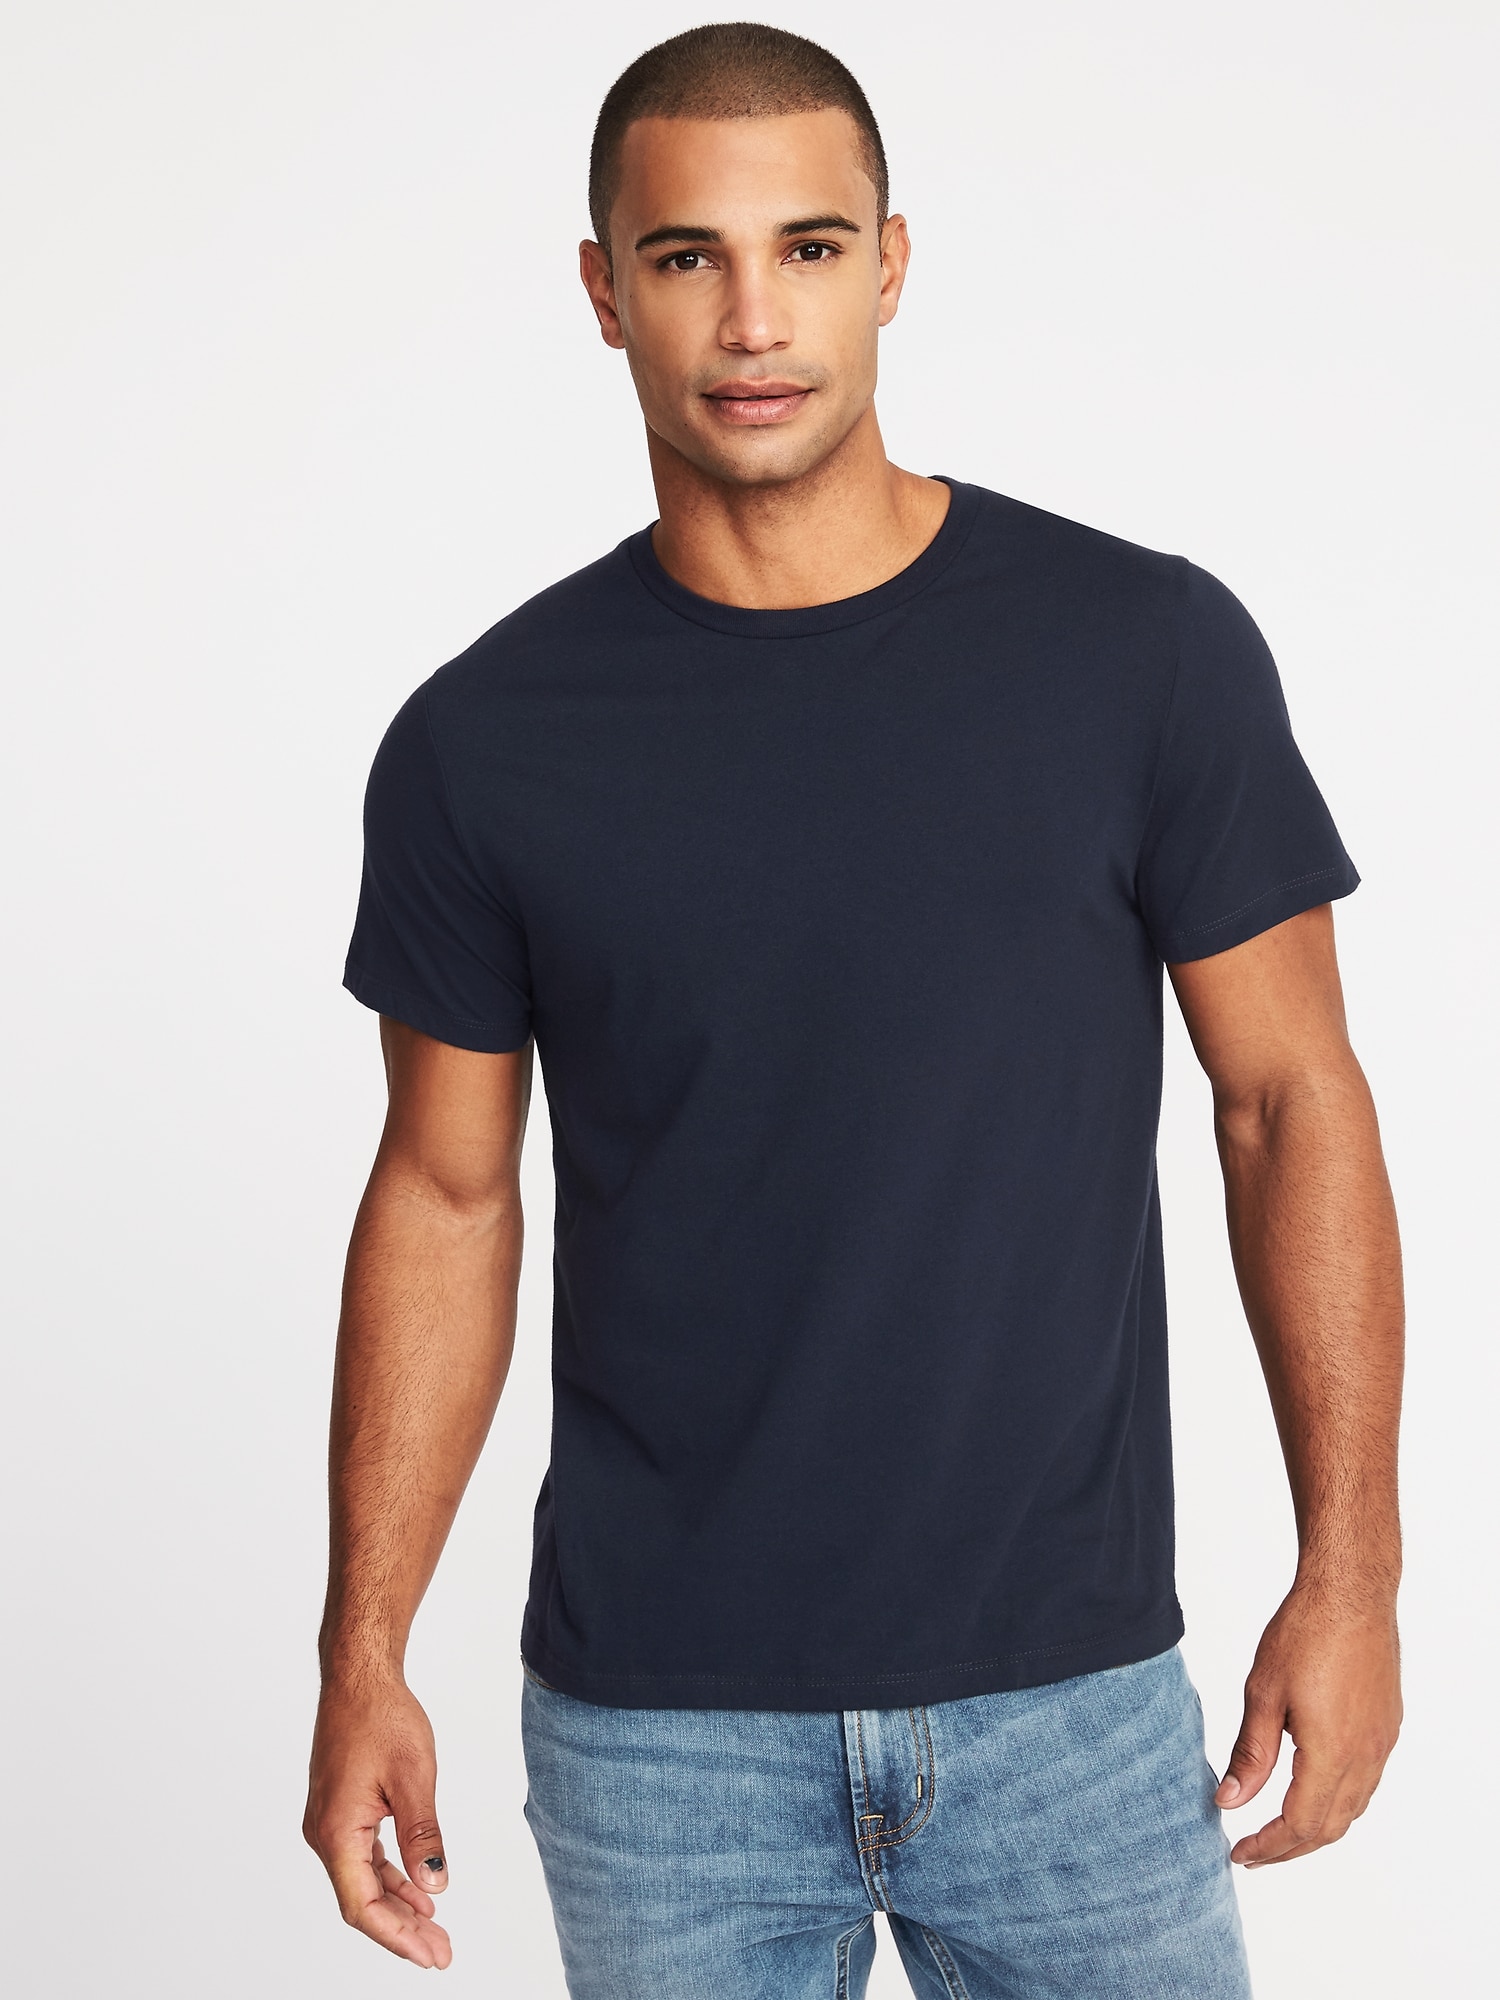 Soft-Washed Crew-Neck Tee for Men | Old Navy